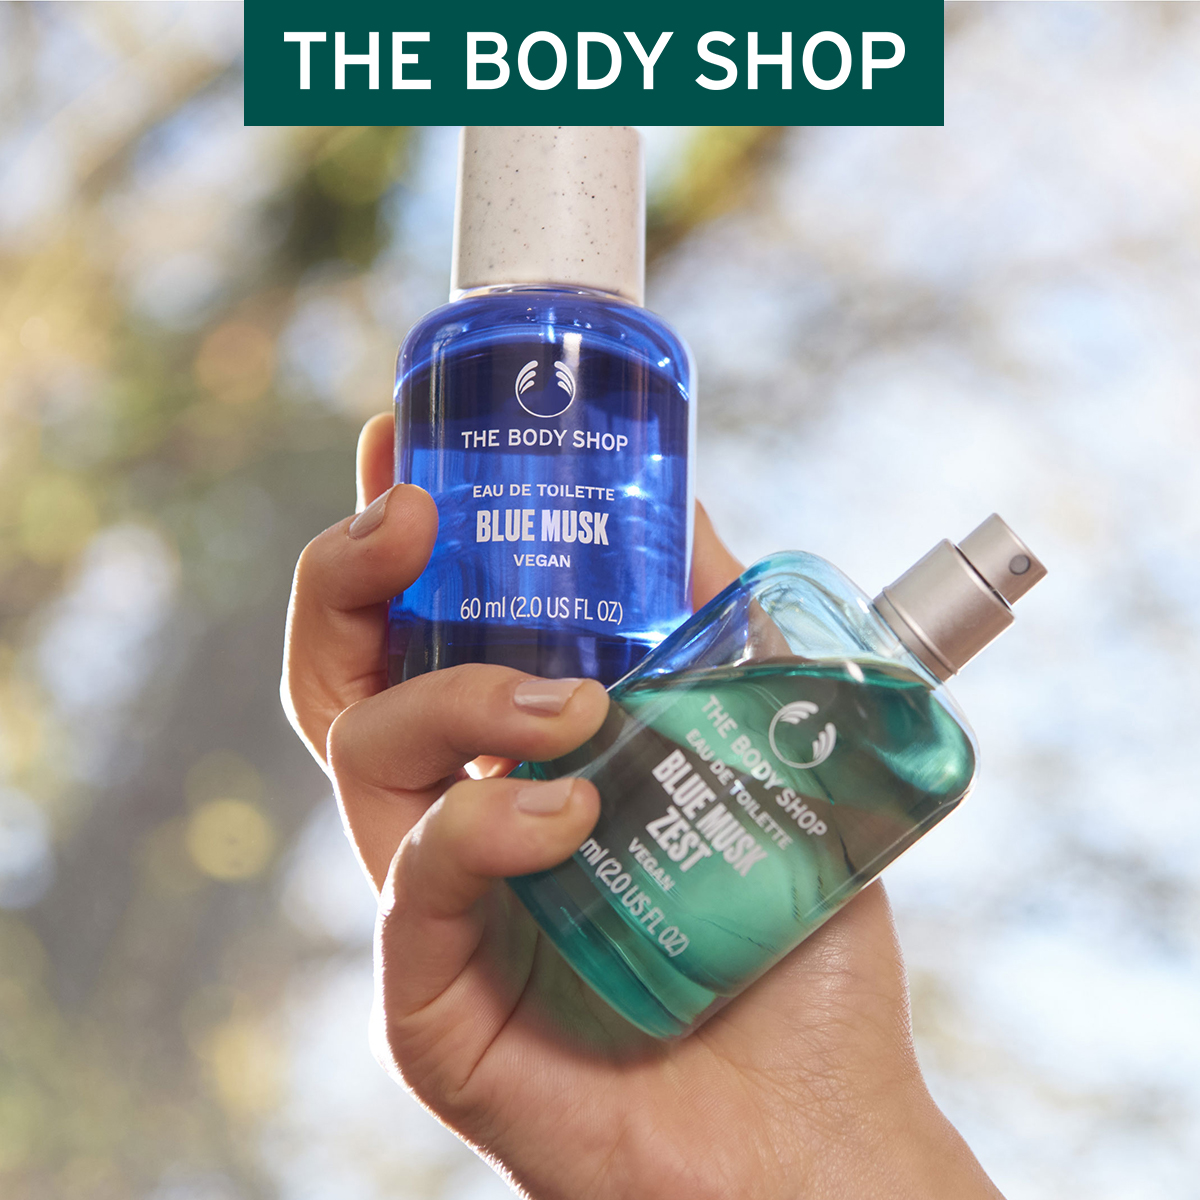 THE BODY SHOP – FIND YOUR VEGAN MUSK